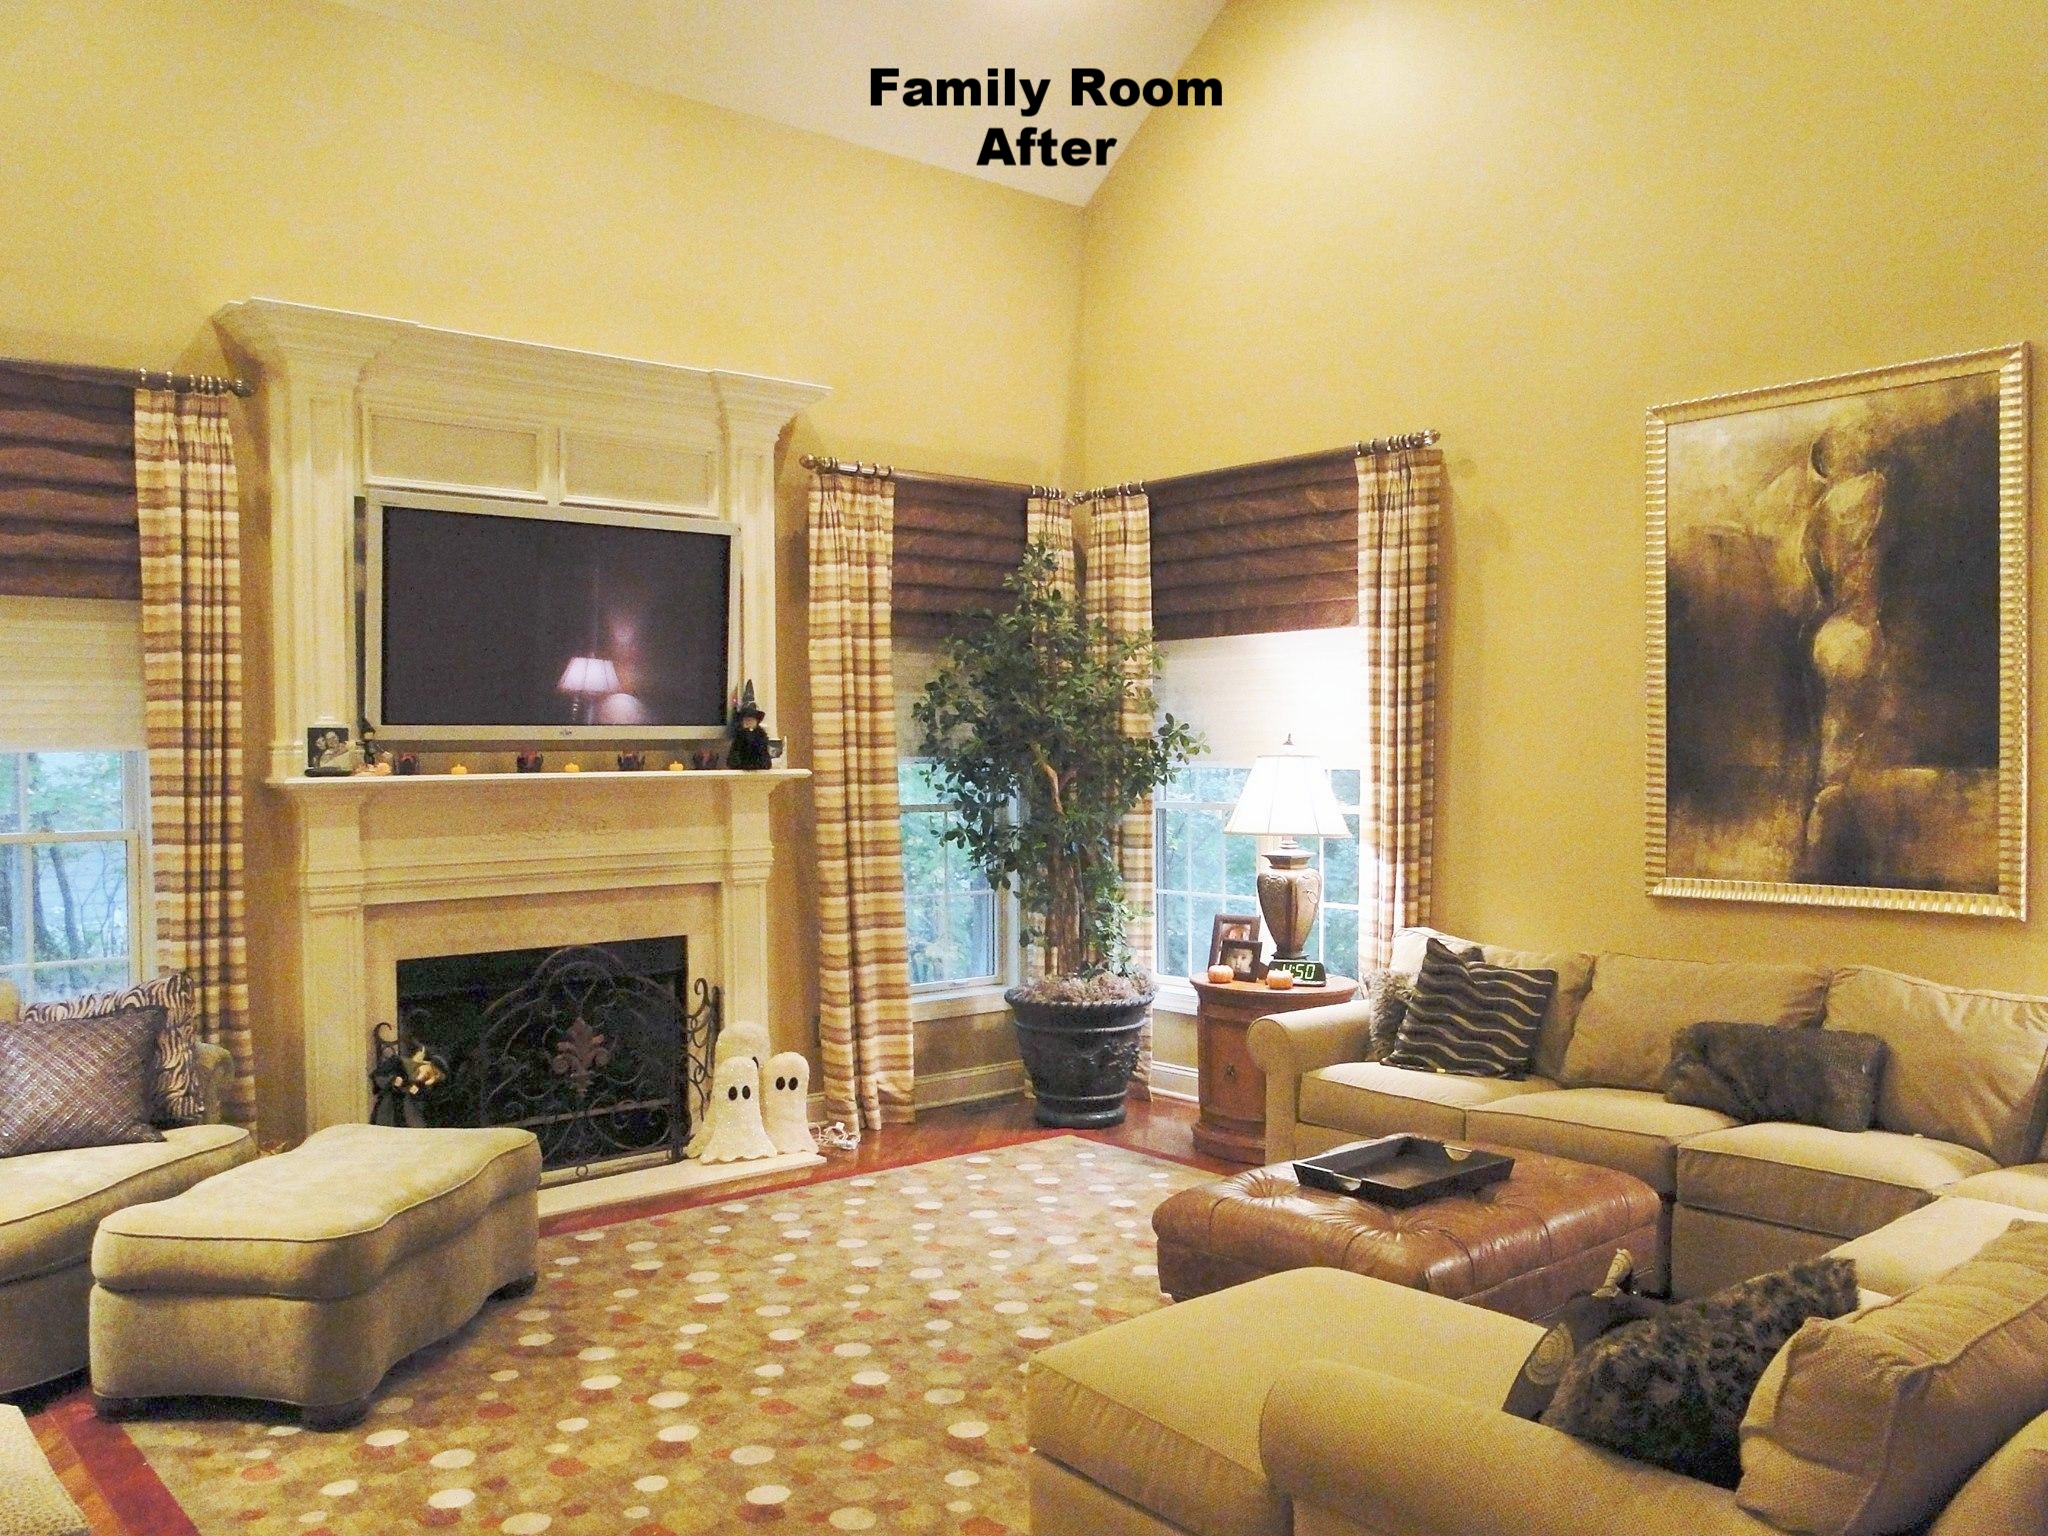 FAMILY ROOM AFTER 